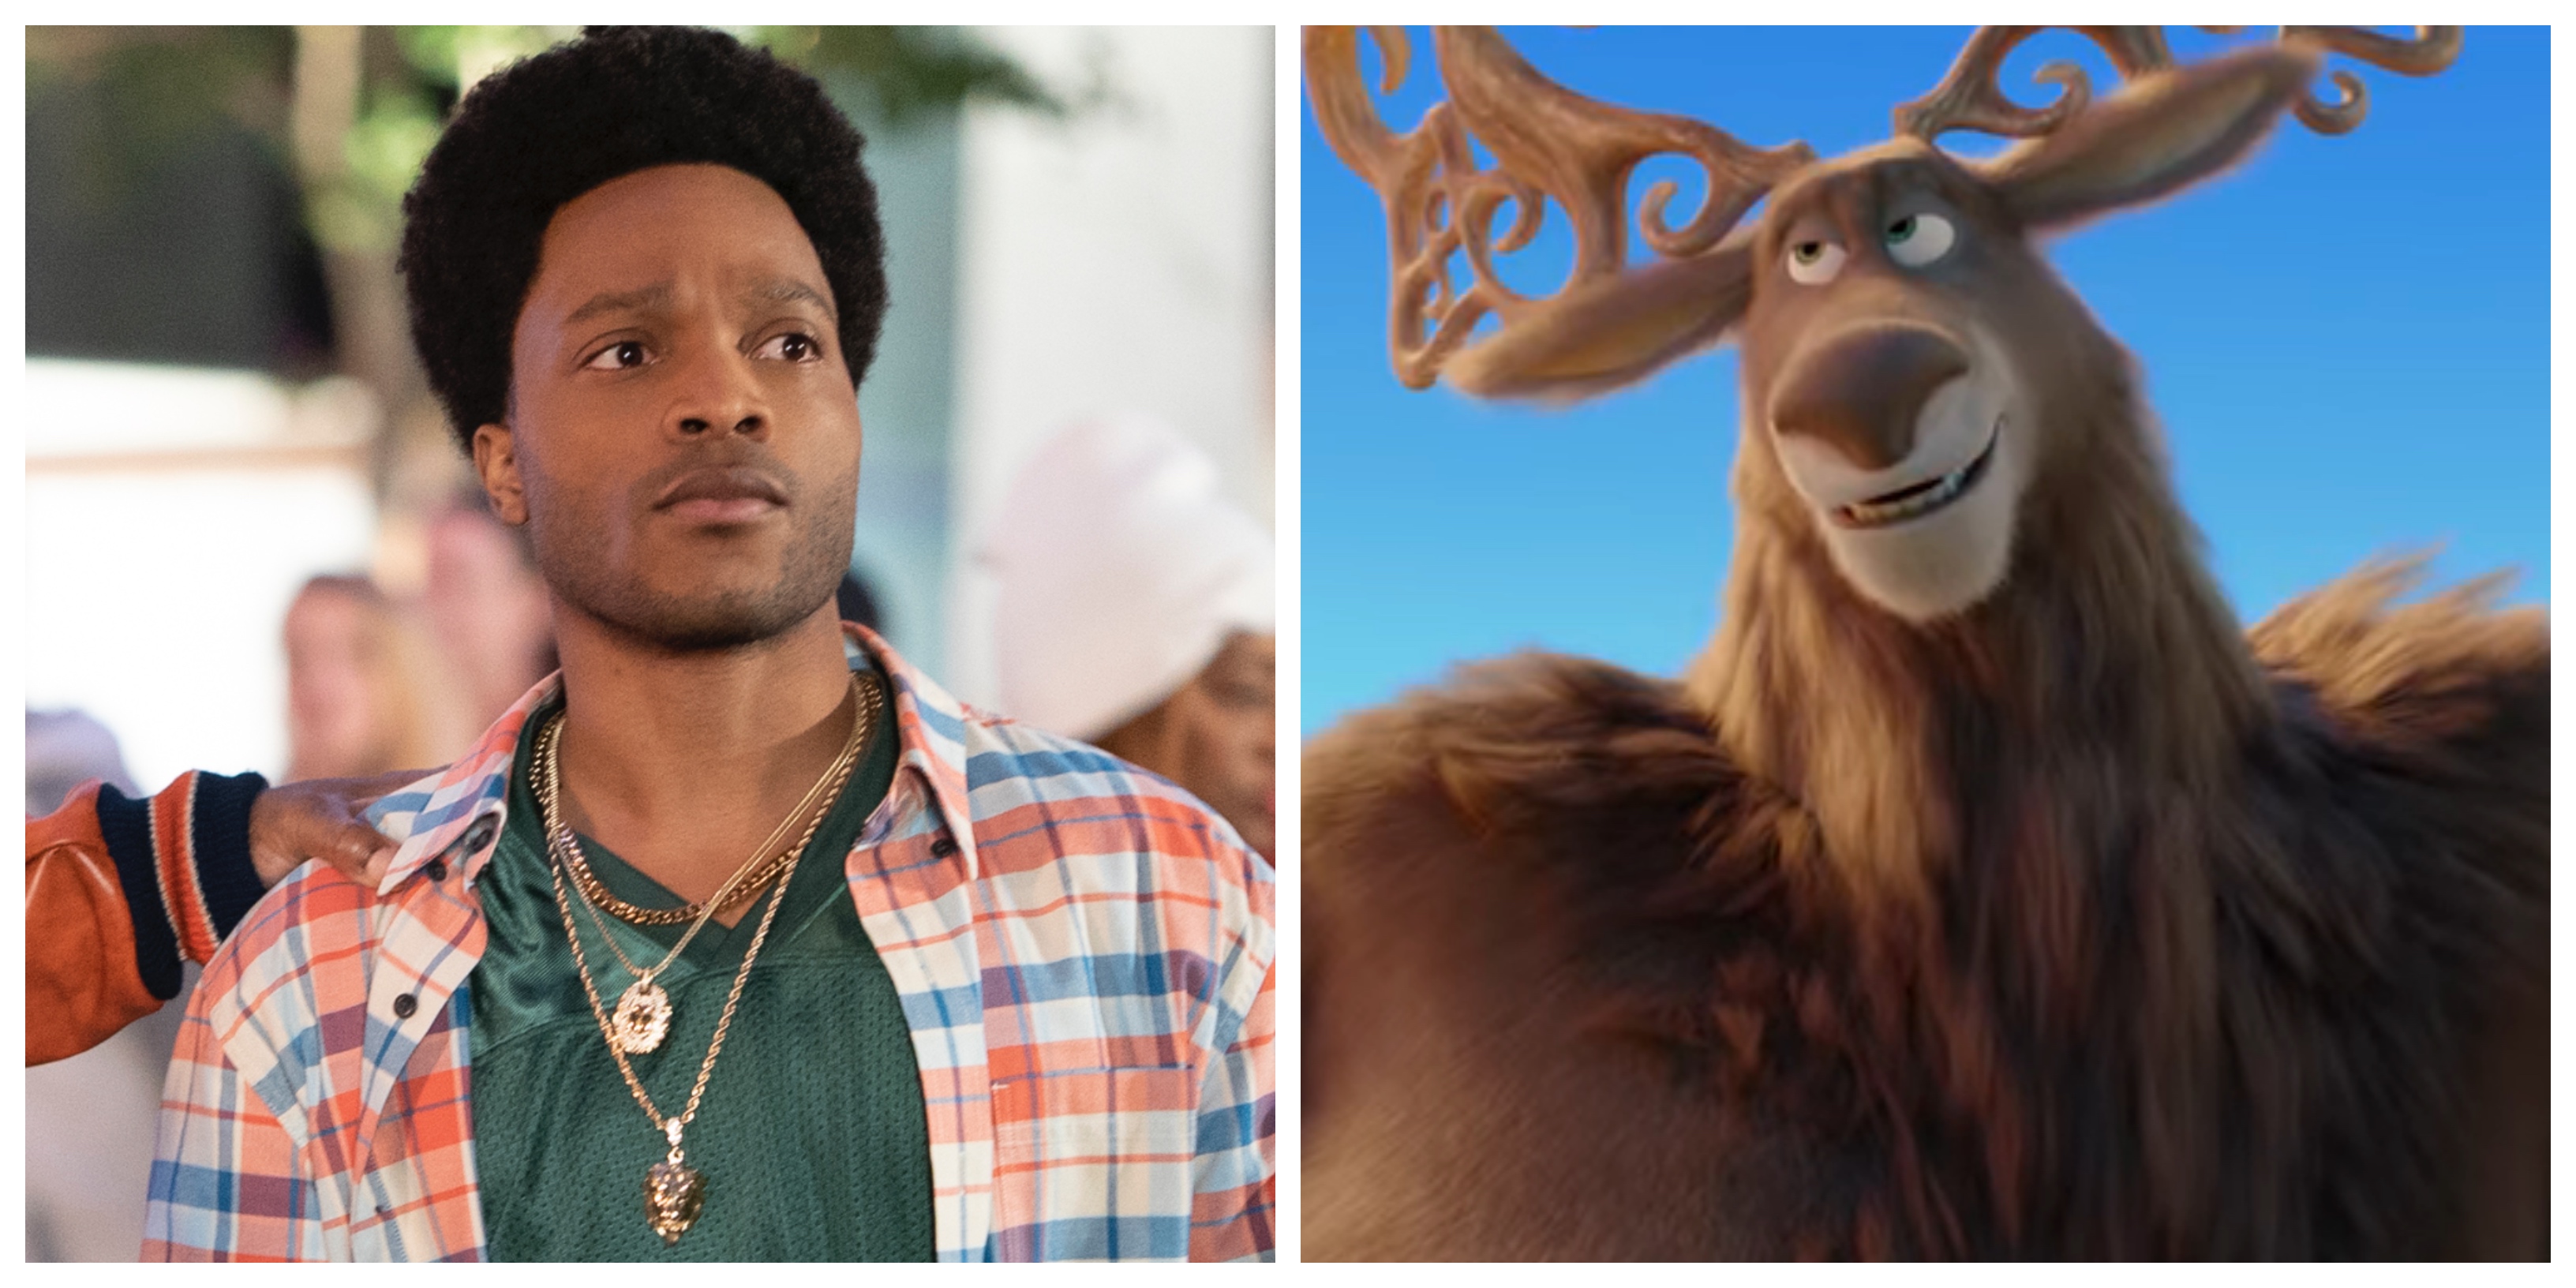 Riverdance: The Animated Adventure Voice Cast - Jermaine Fowler as Benny